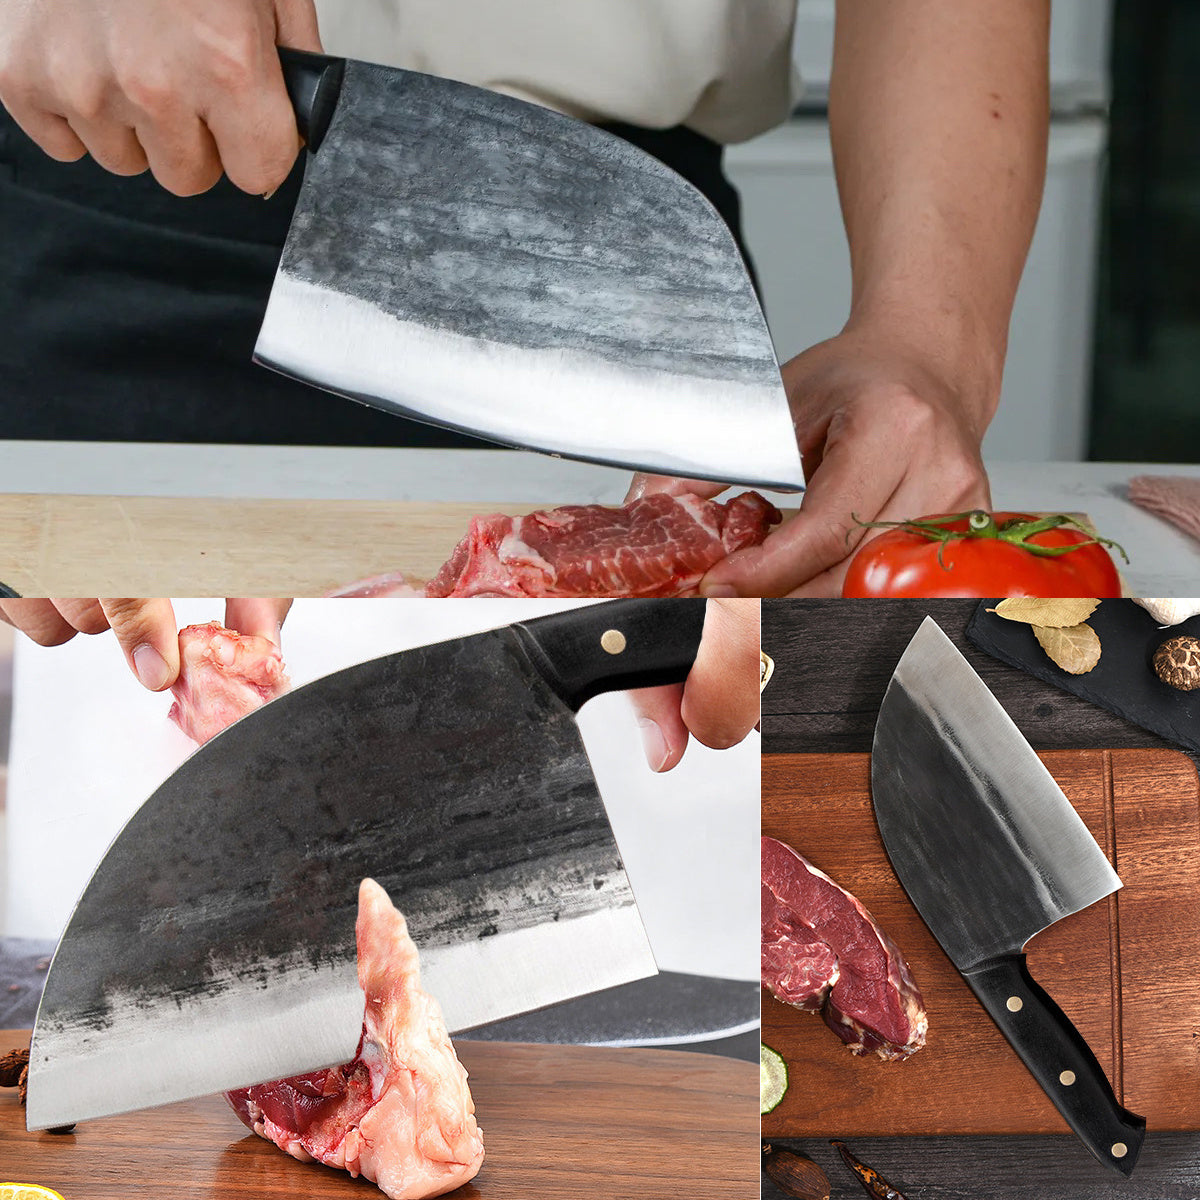 Qulajoy Serbian Chef Knife 6.7 Inch - High Carbon Steel Meat Cleaver - Professional Japanese Full Tang Hammered Cutting Knife